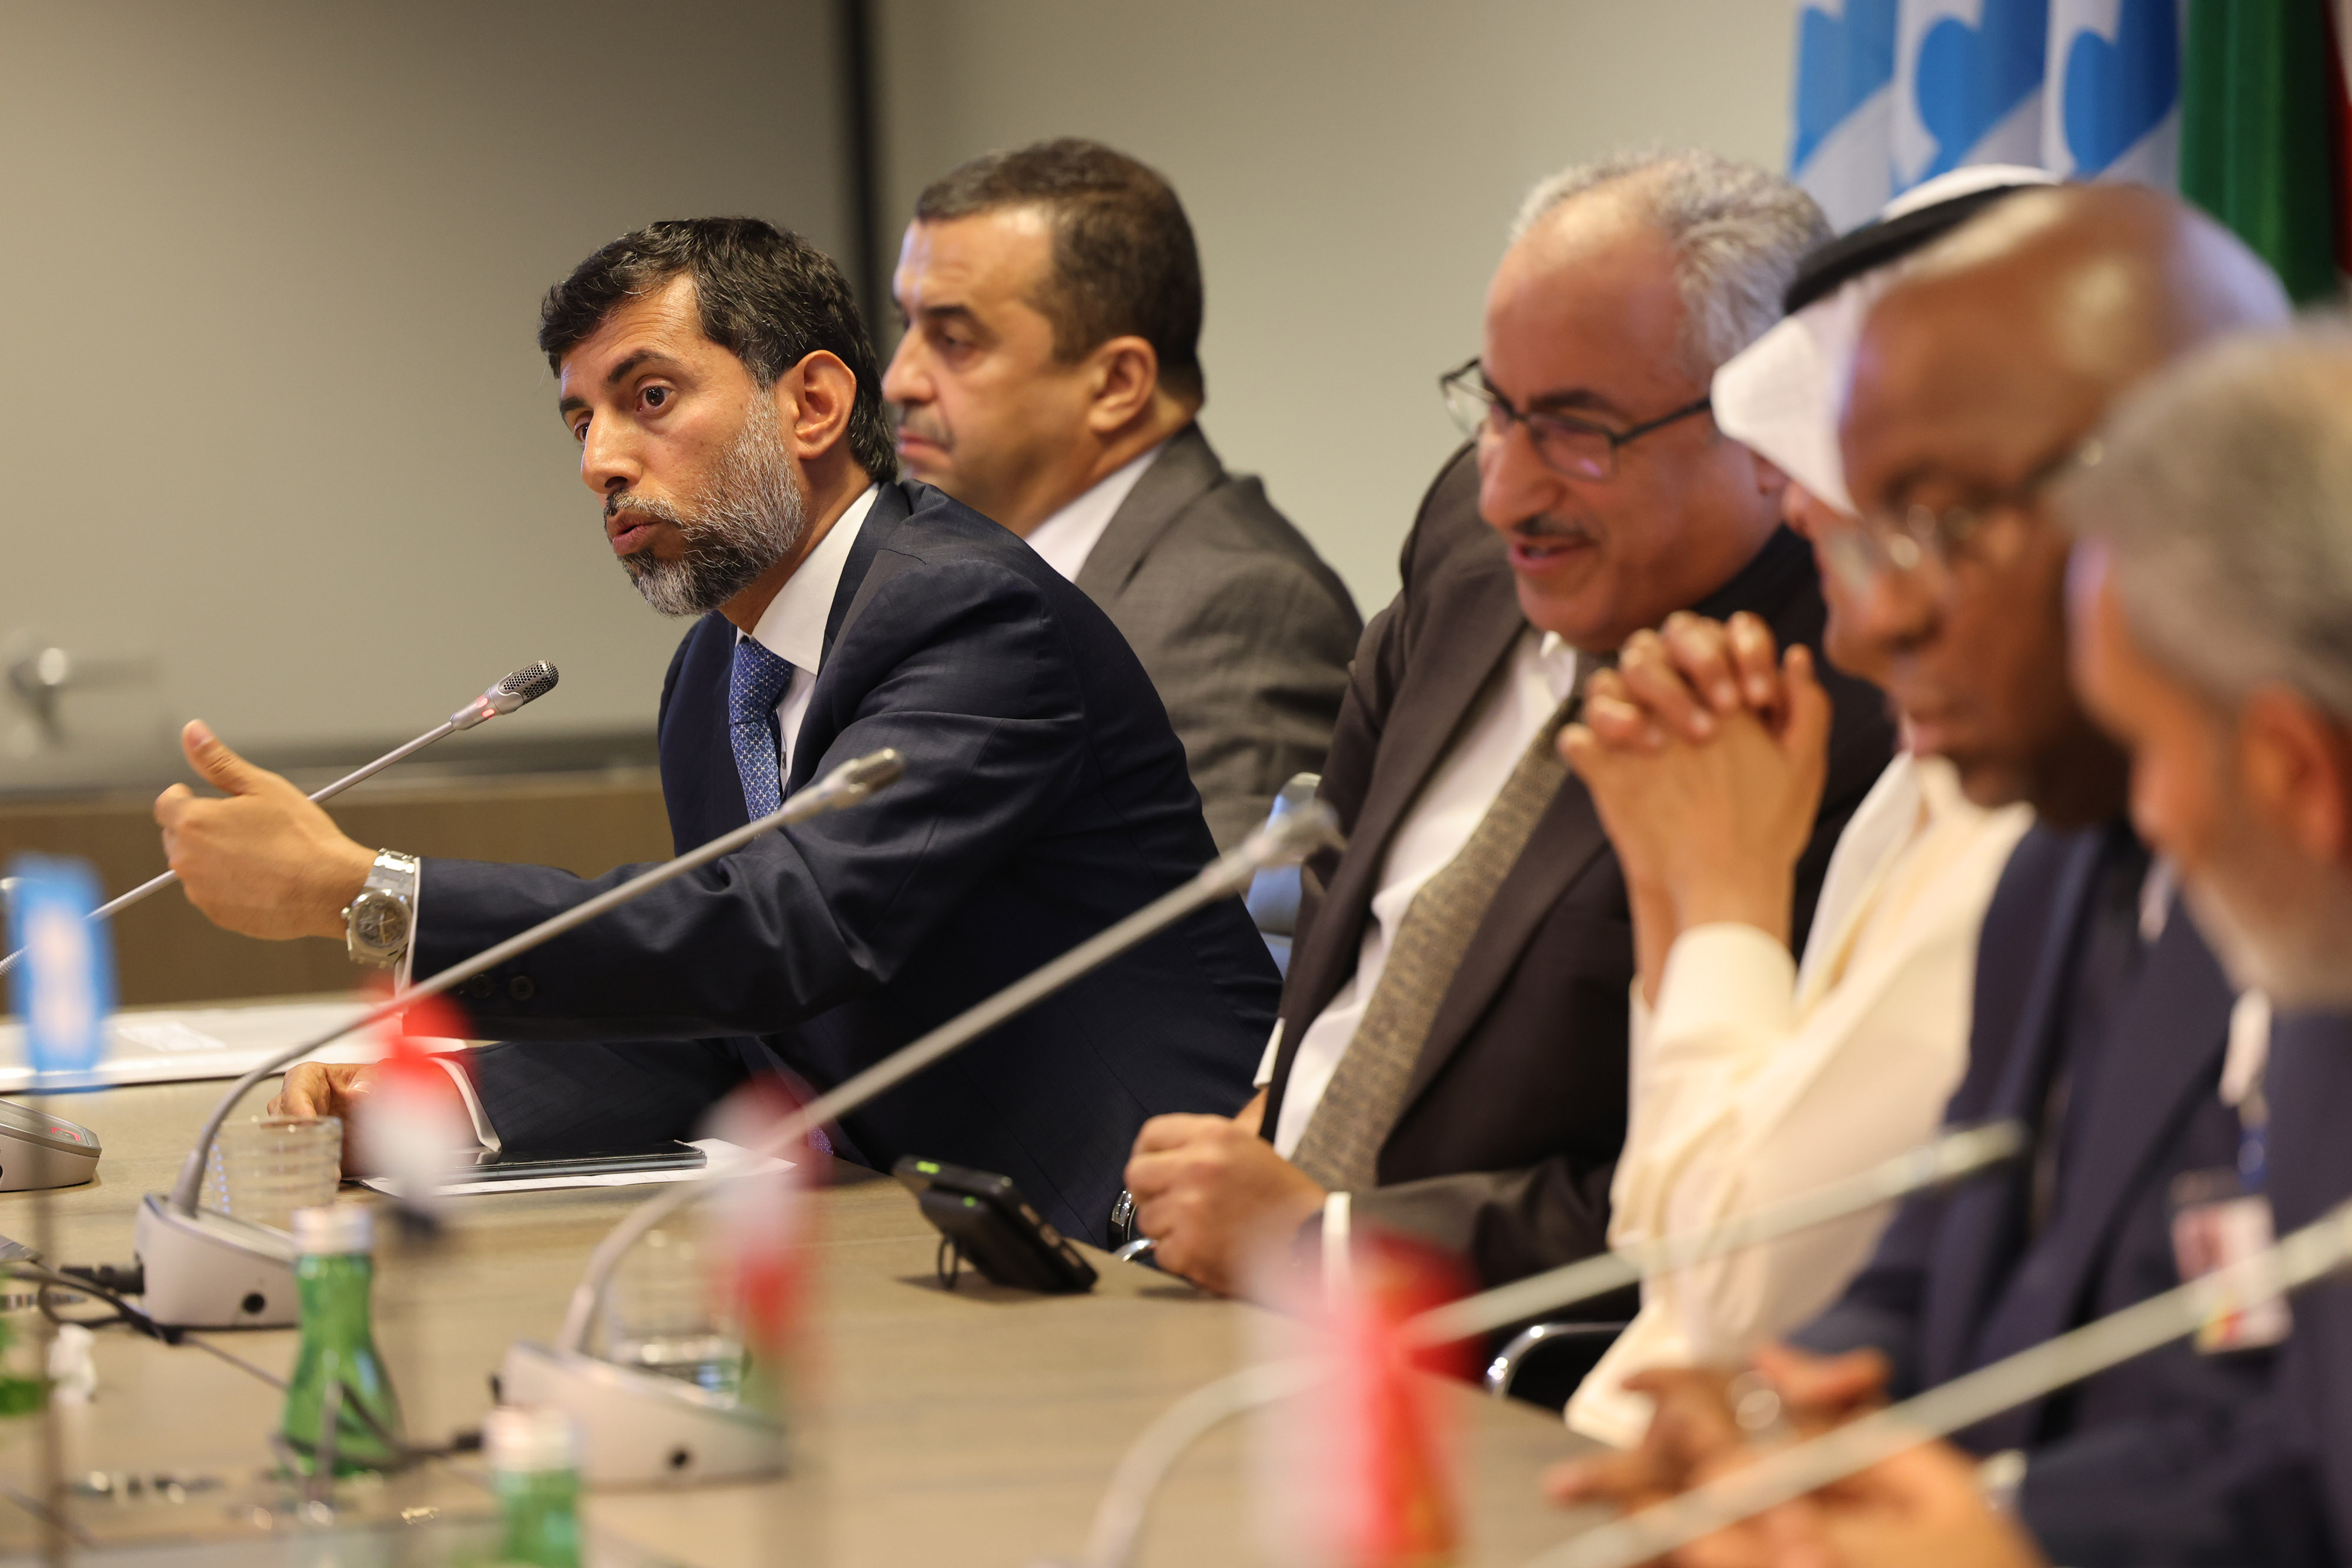 Suhail Al Mazrouei, left, during an OPEC news conference in Vienna in October.